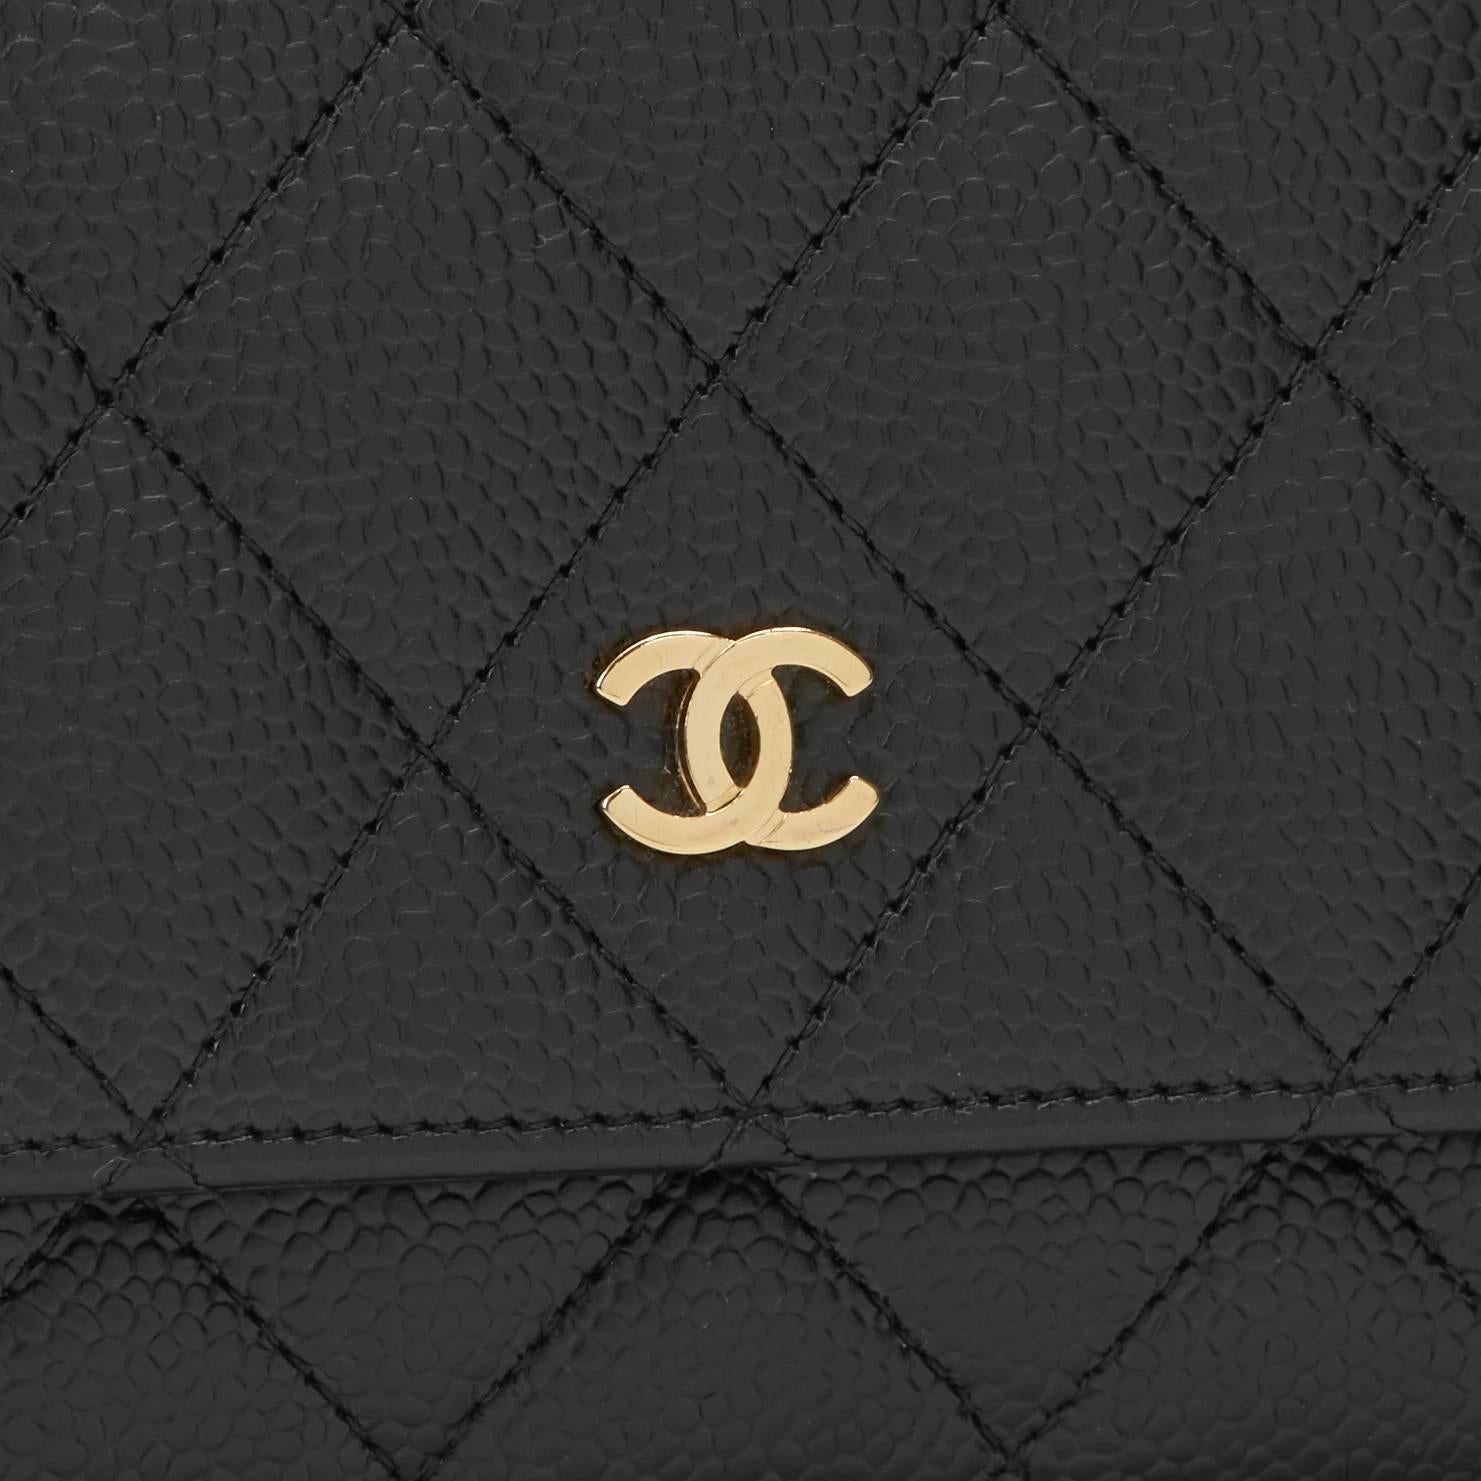 CHANEL
Black Quilted Caviar Leather Wallet-on-Chain WOC

This CHANEL Wallet-on-Chain is in Excellent Pre-Owned Condition accompanied by Chanel Dust Bag, Box, Authenticity Card, Care Booklet. Circa 2013. Primarily made from Caviar Leather